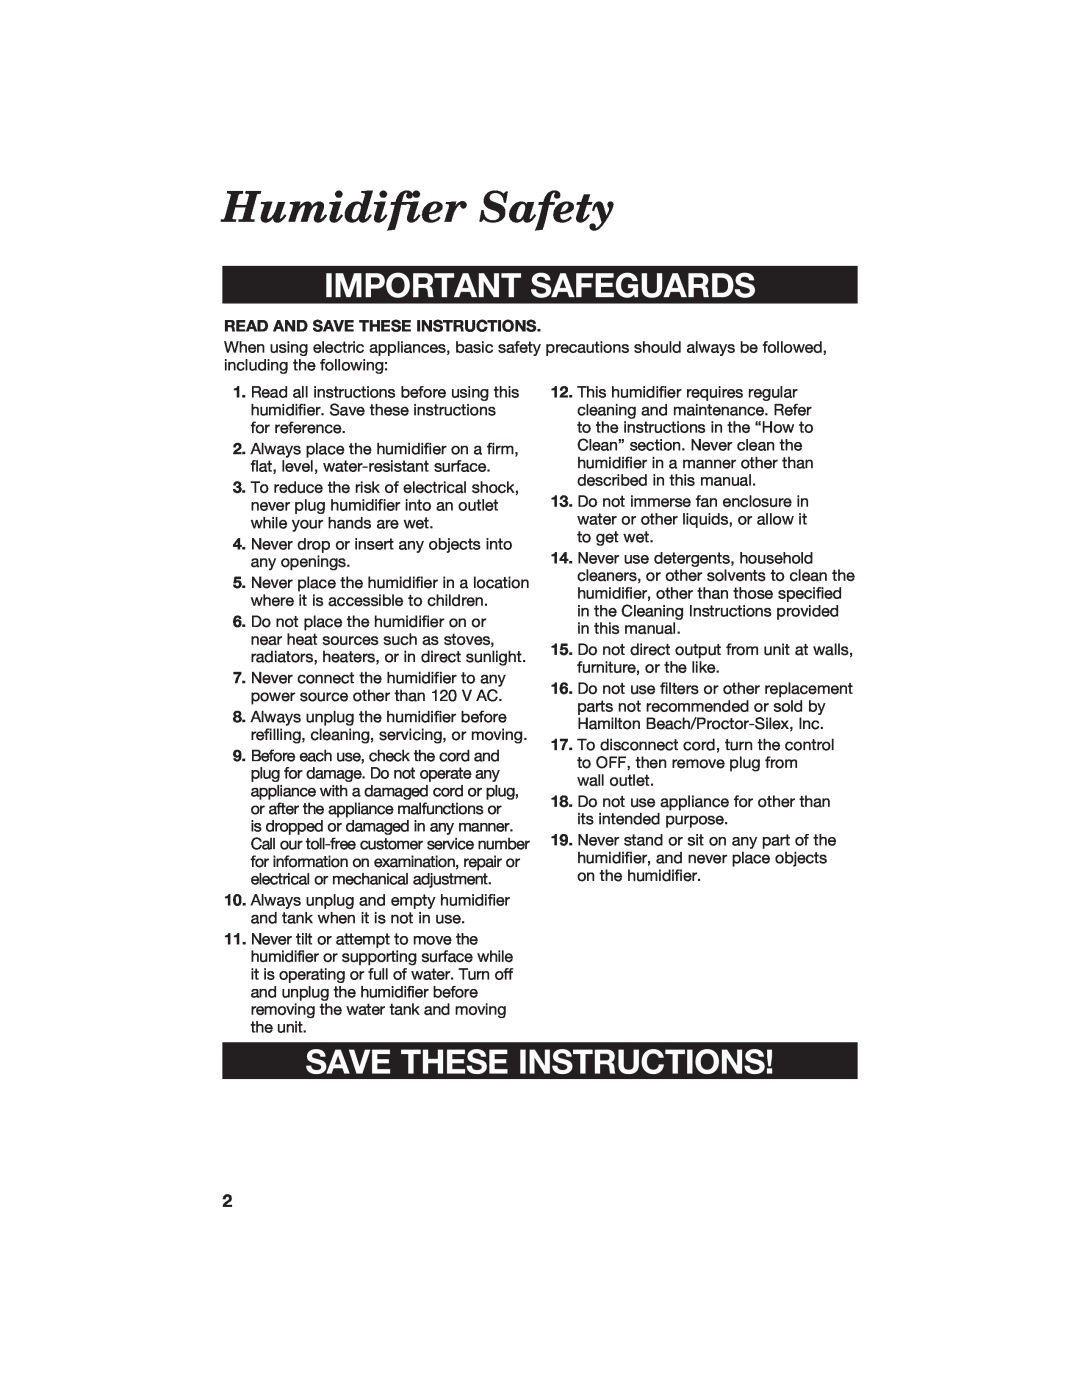 Hamilton Beach 840074800 manual Humidifier Safety, Important Safeguards, Save These Instructions 